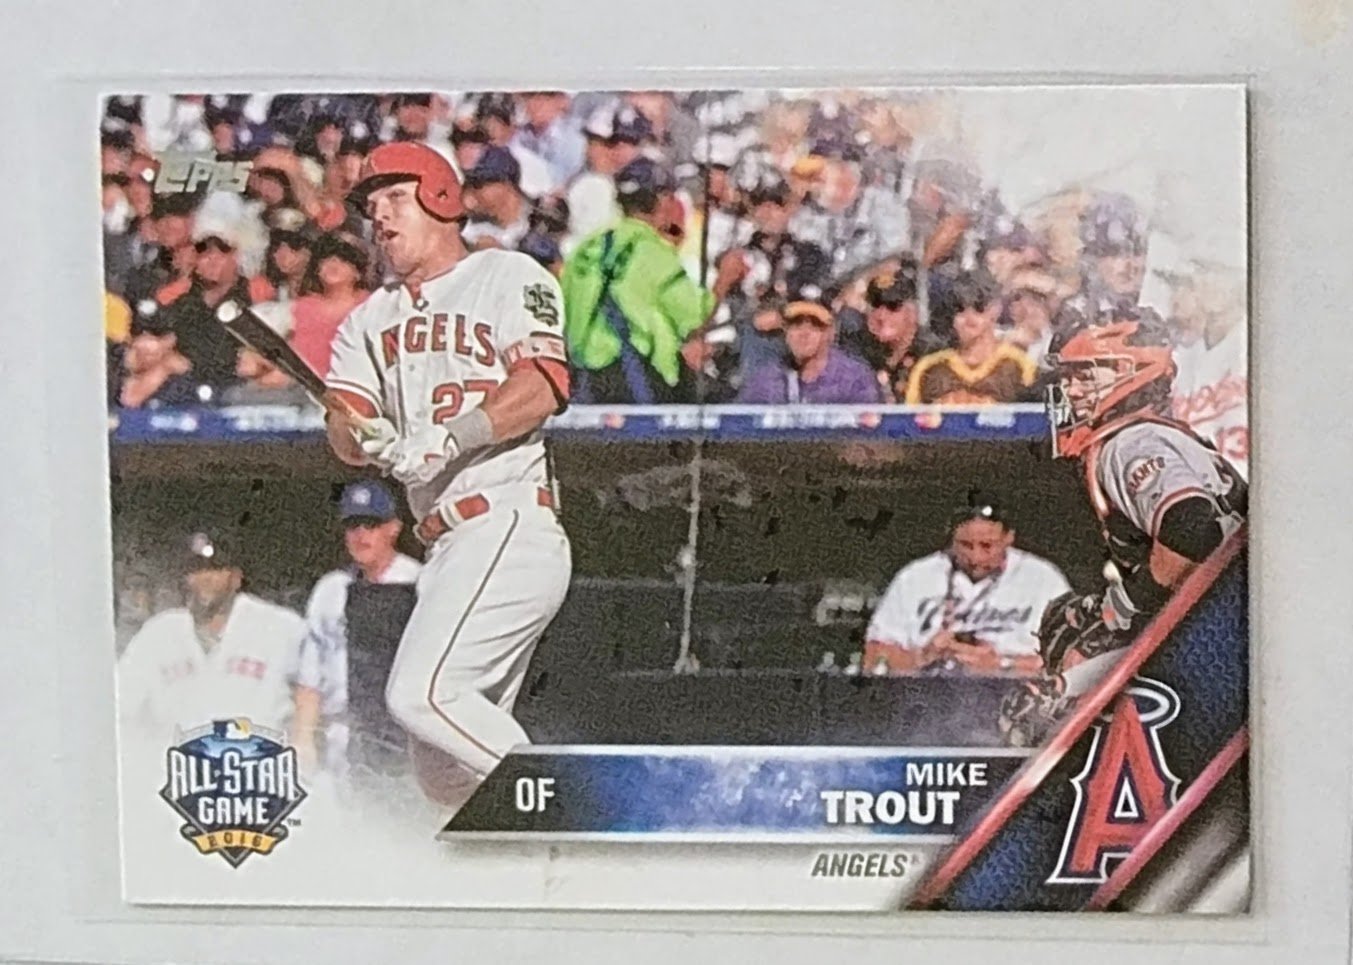 2016 Topps Update Mike Trout All Star Game Insert Baseball Card TPTV simple Xclusive Collectibles   